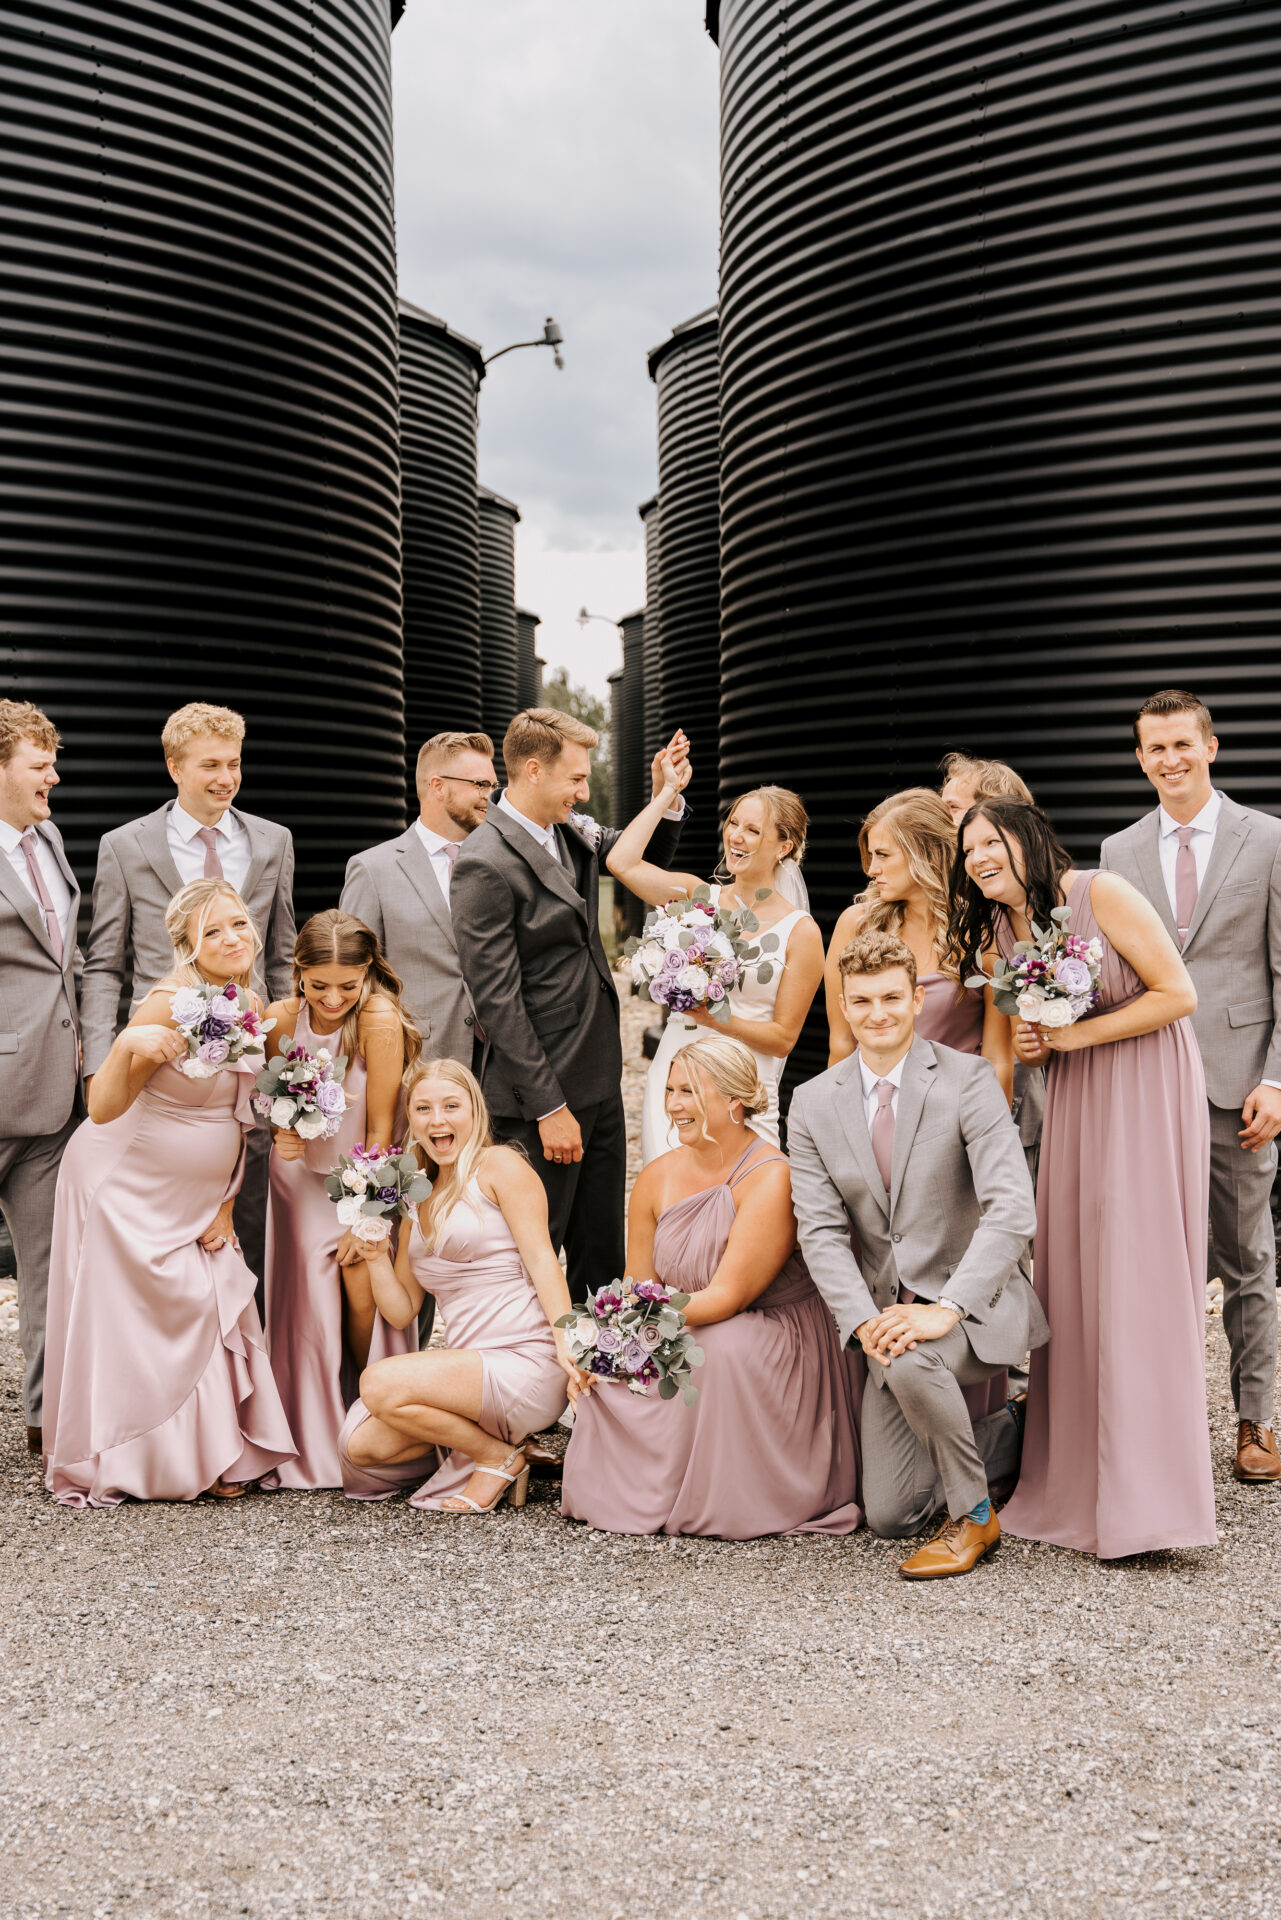 Bridal Party Photo with Purple Bridesmaid Dresses and Gray Groomsmen Suits